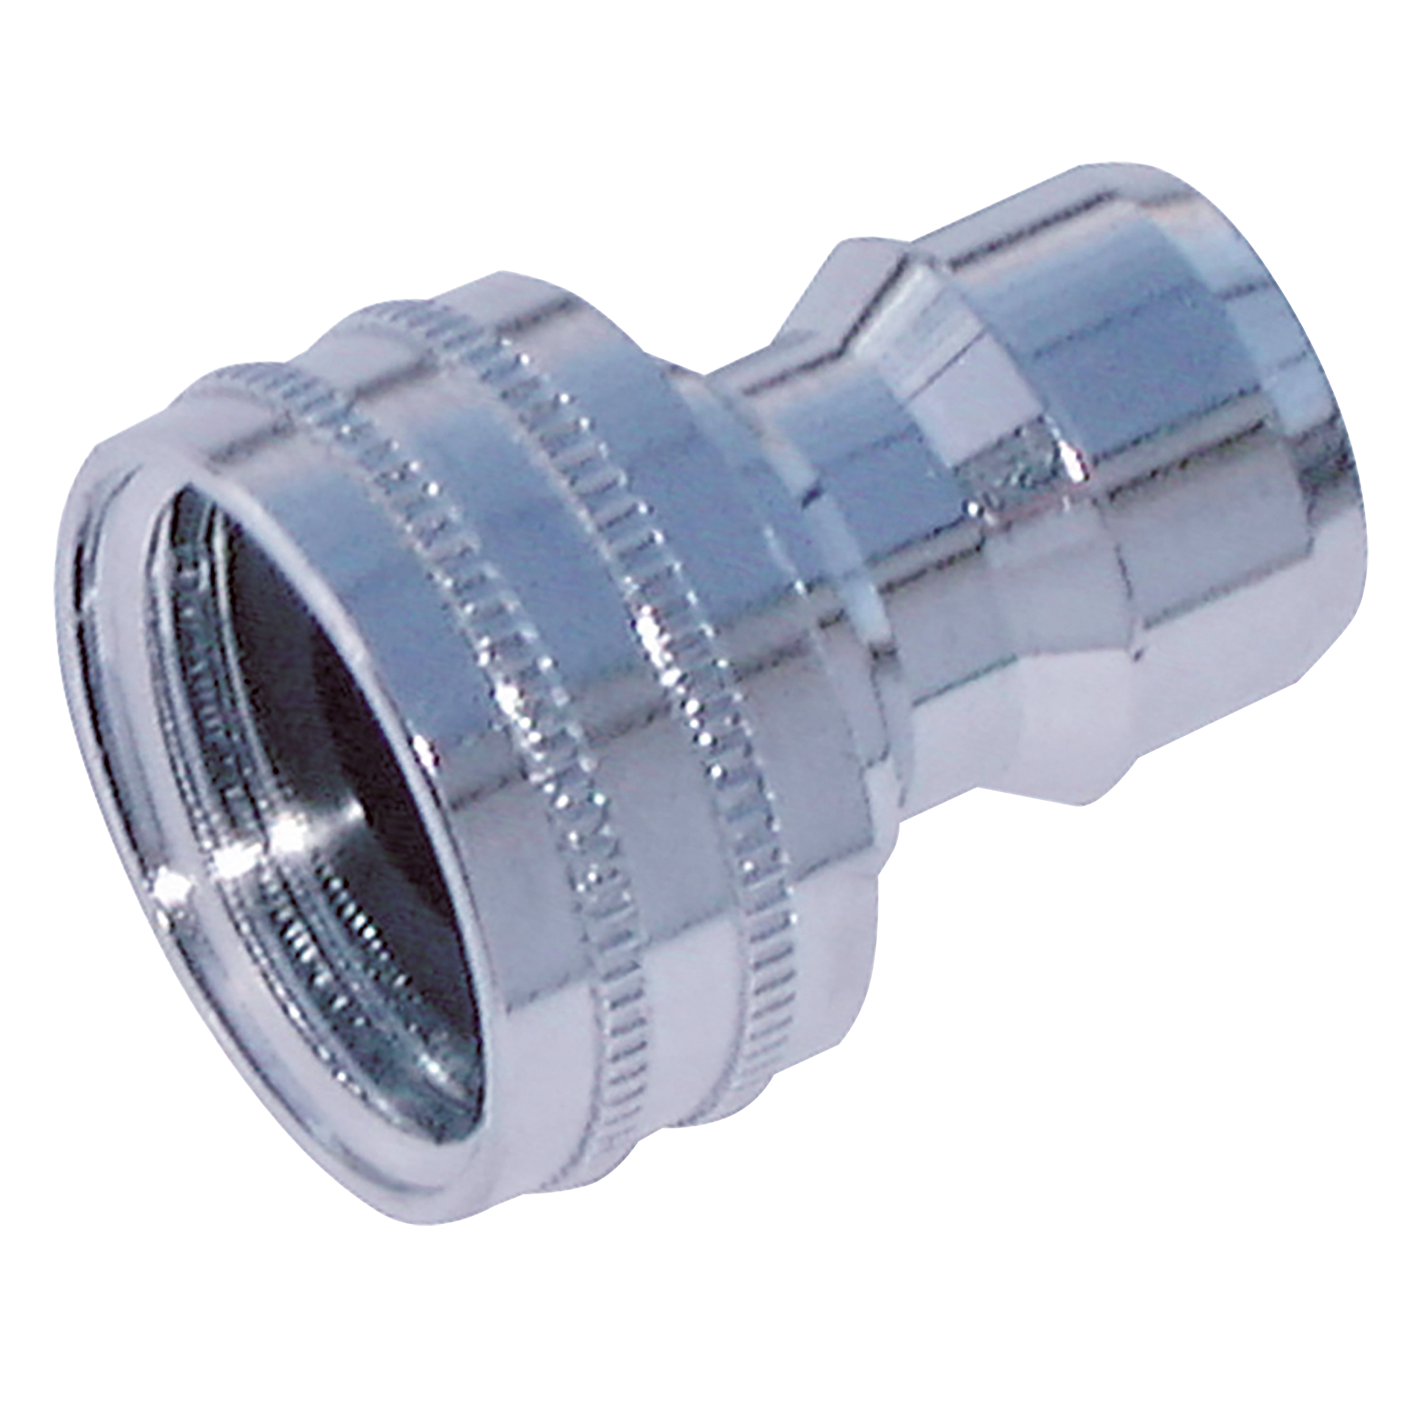 NITO 1/2" SYS NIPPLE WITH 3/4"BSP FEMALE